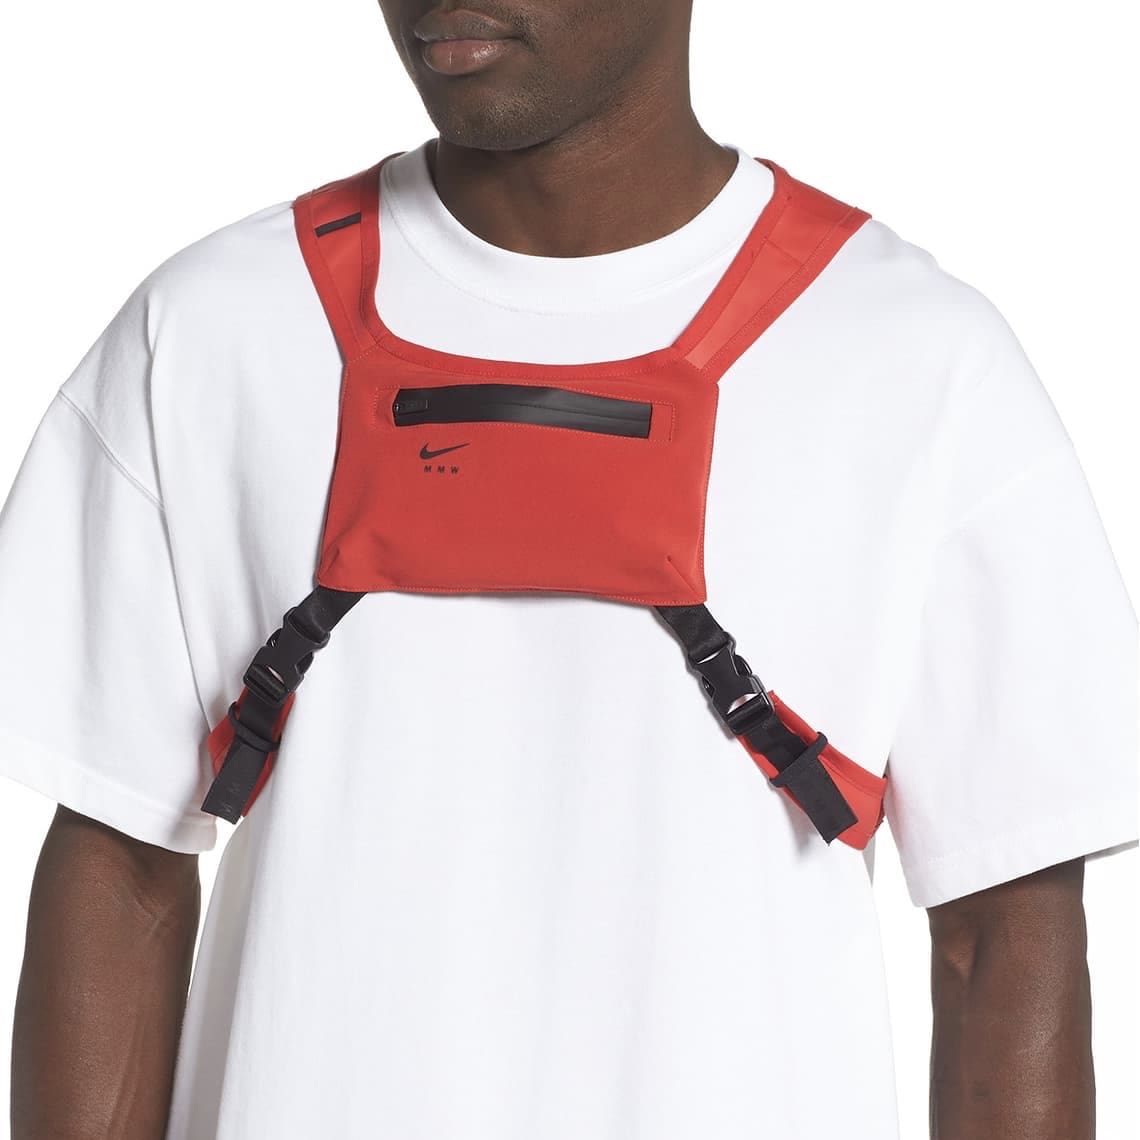 Nike x MMW Chest Rig - Soldier Systems Daily